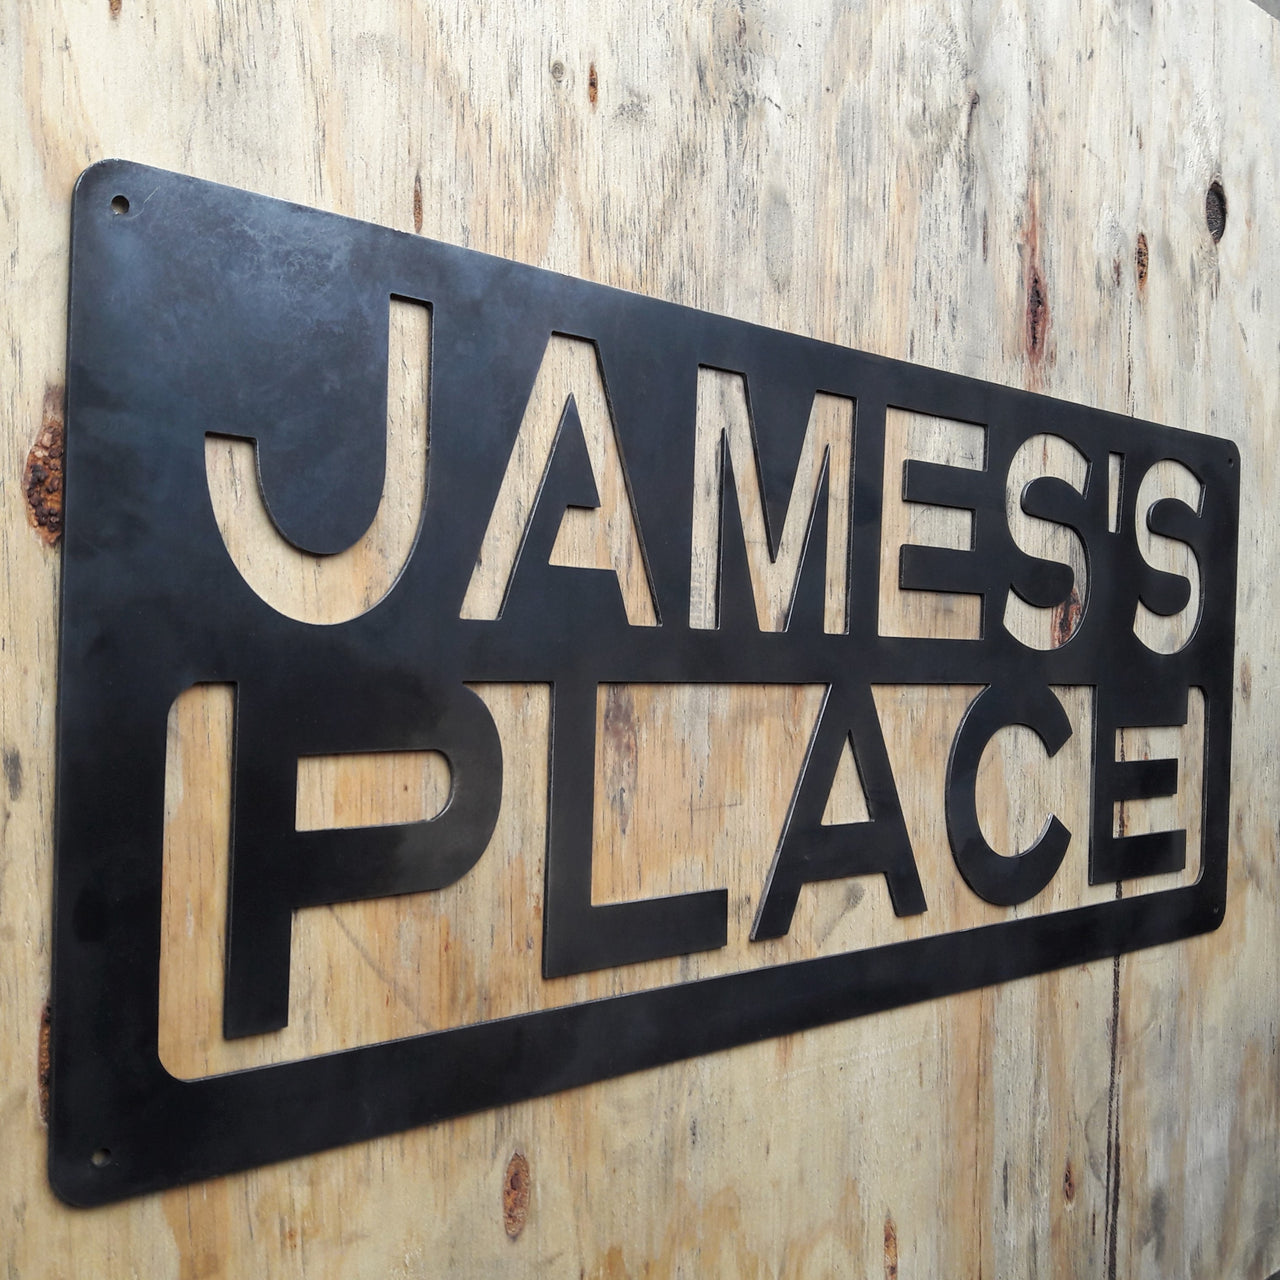 This is a custom metal sign that reads, "James's Place".